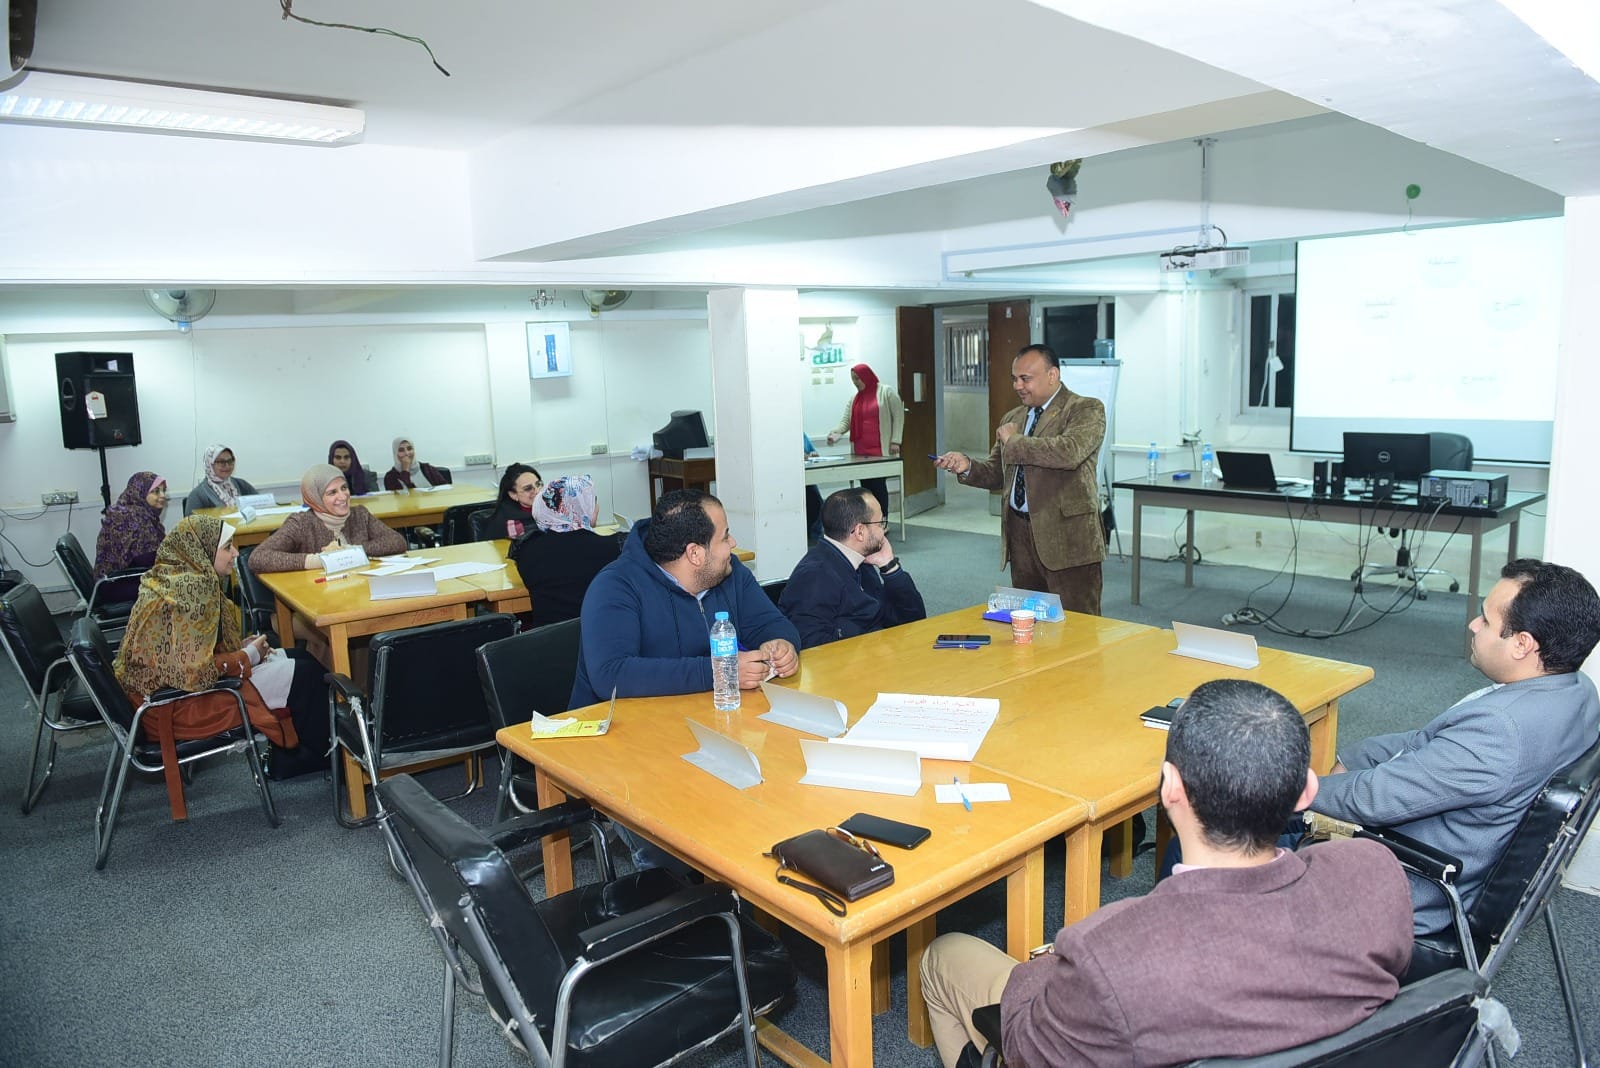 The Center of Developing the Capacity of staff Members and Leaders at Sohag University concludes its training program about effective presentation skills